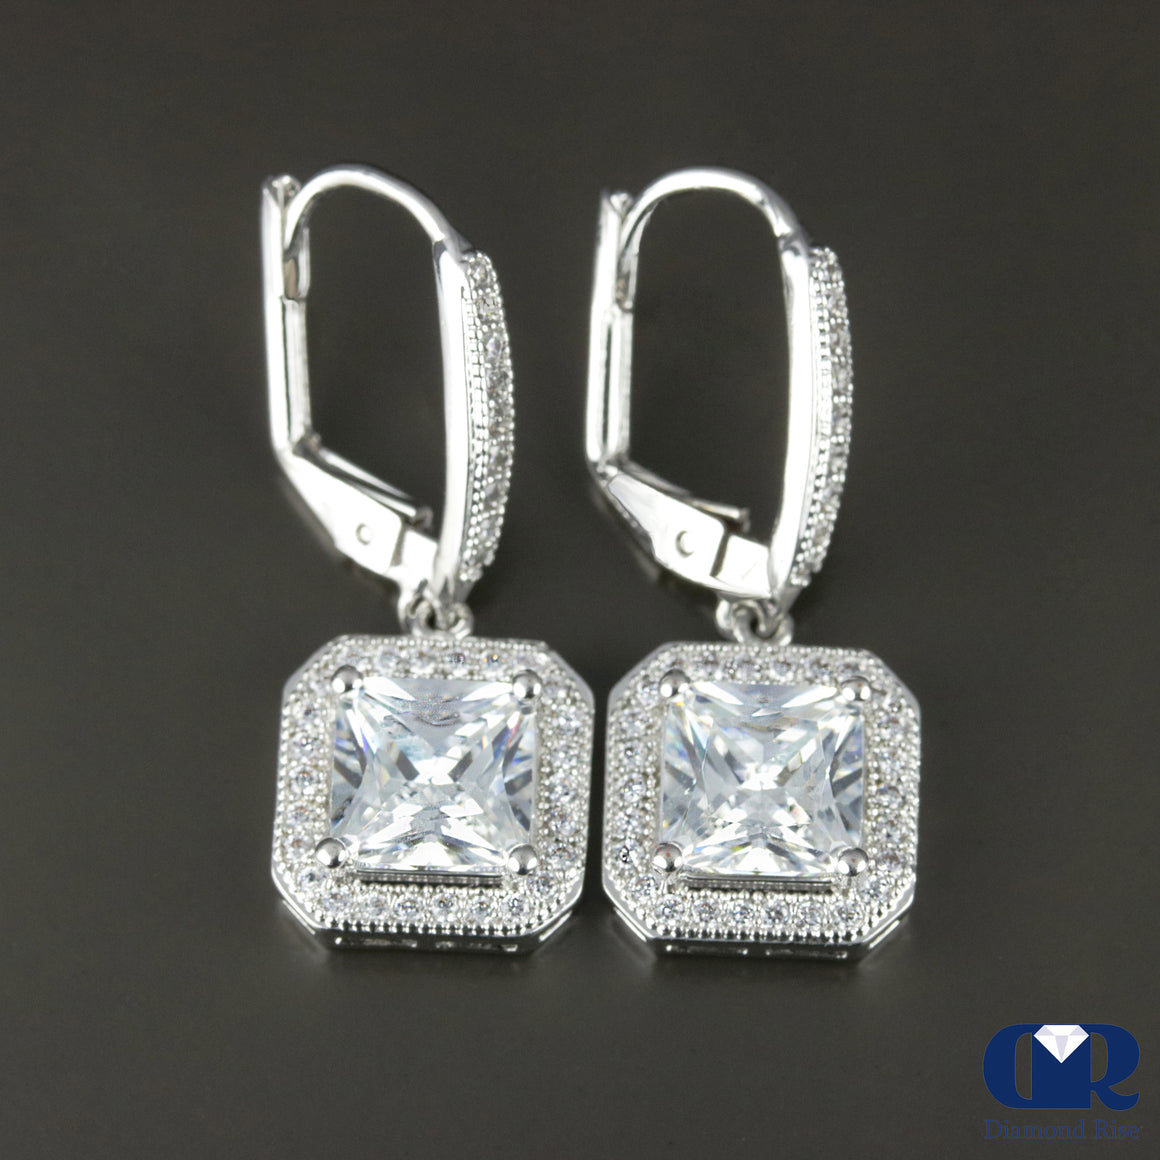 Princess Cut Diamond Drop Earrings With Lever back In 14K White Gold - Diamond Rise Jewelry